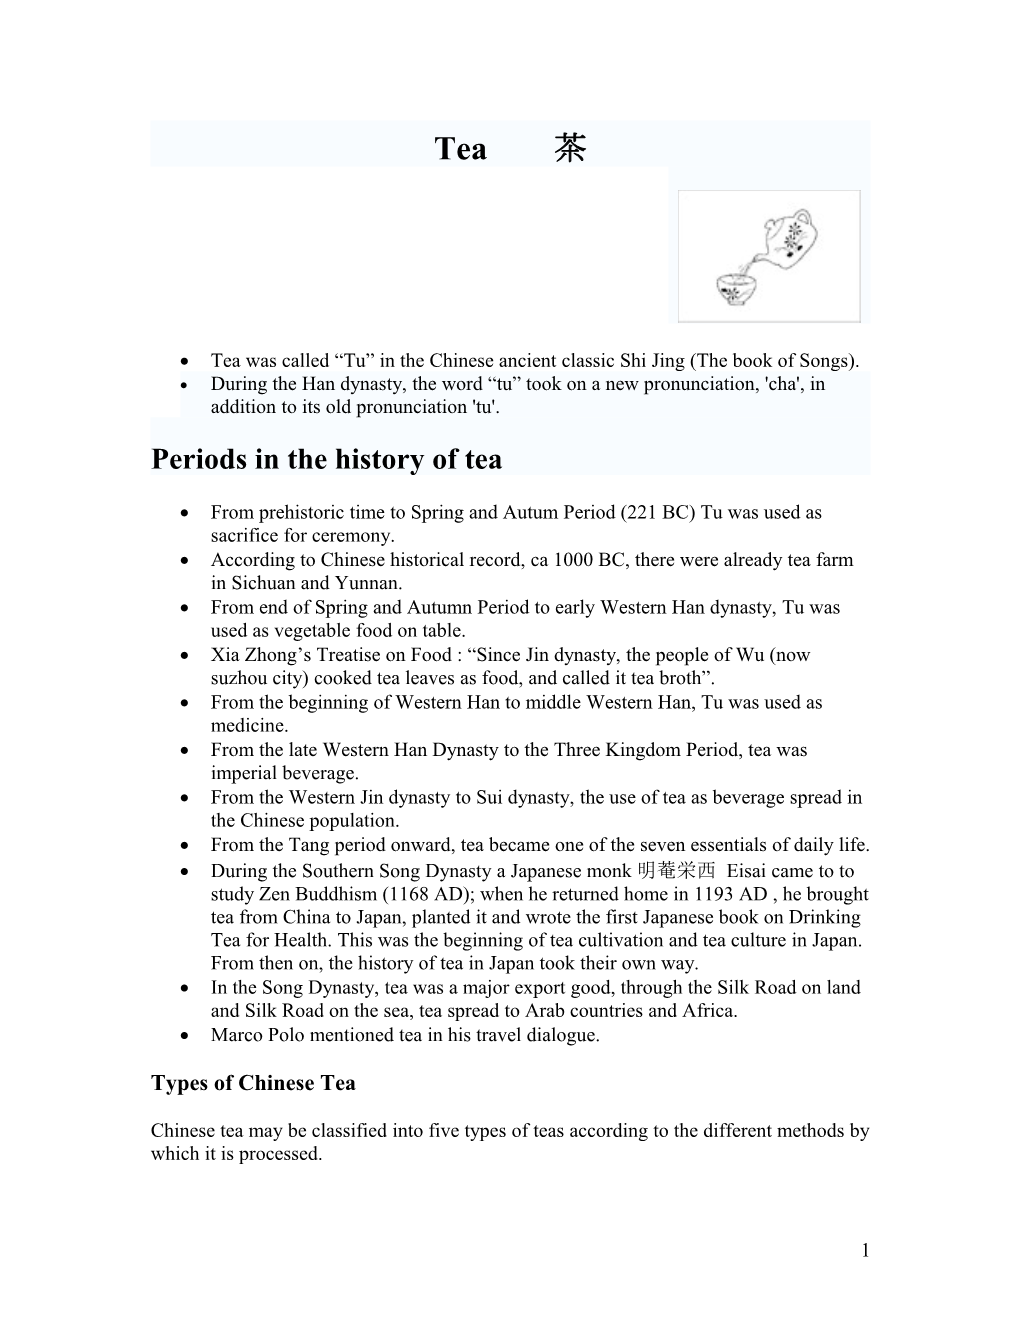 Periods in the History of Tea